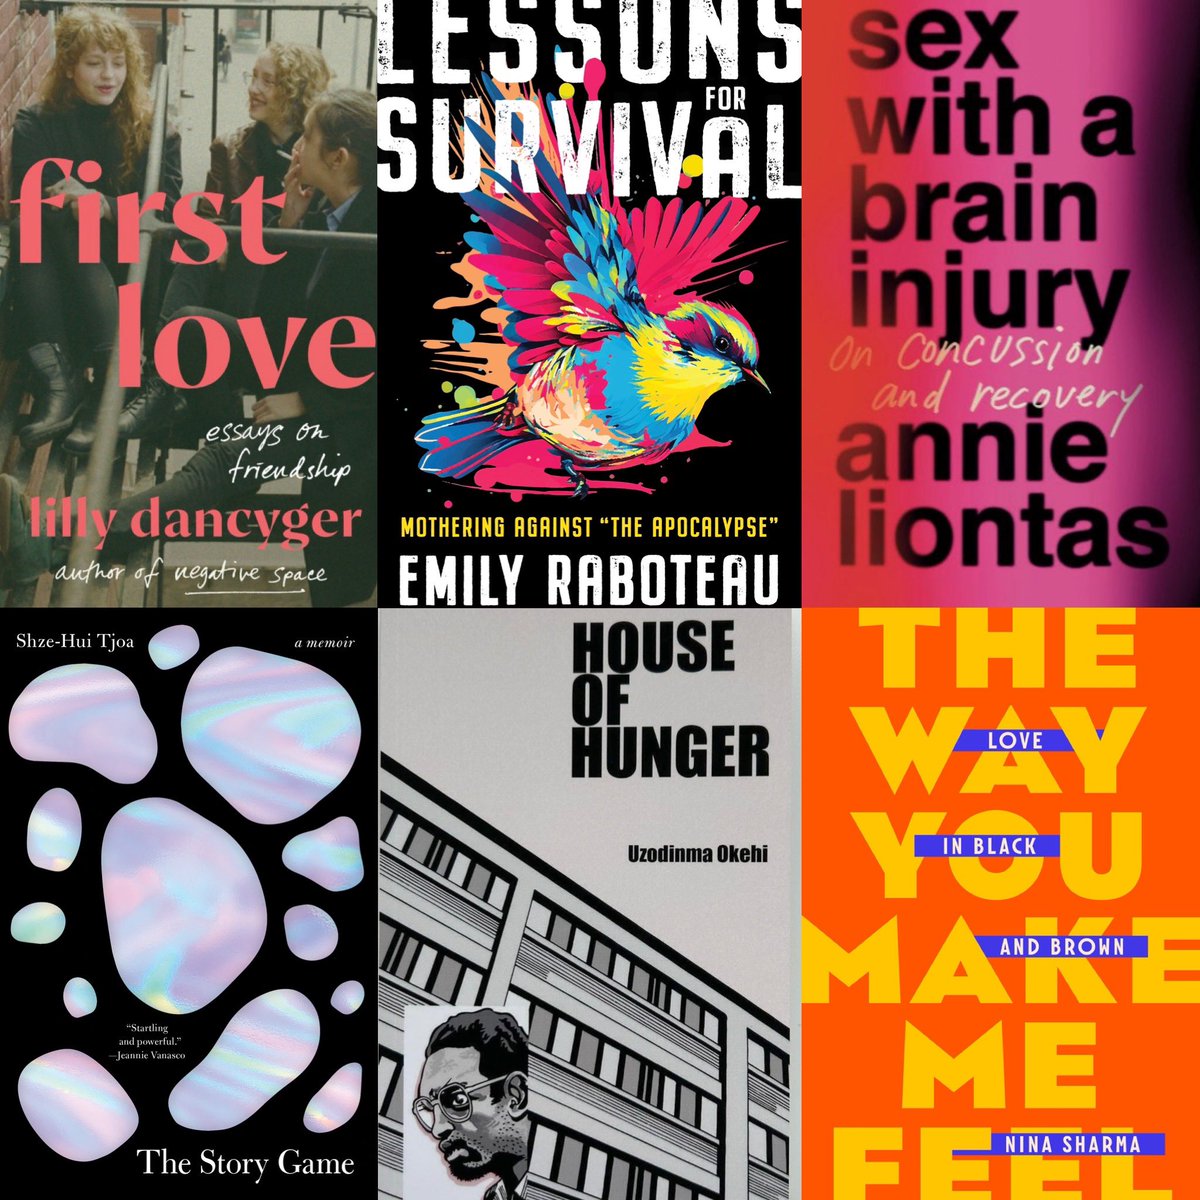 MONDAY, 8PM: So excited to host the authors of these stunning books at @FranklinParkBK Reading Series Nonfiction Night: @emilyraboteau, @lillydancyger, @aliontas, @nsharmawriter, @shzehuitjoa & @whoisbokoye! #Free book raffle + books sold by @UnnameableB! fb.me/e/6pQvazha5